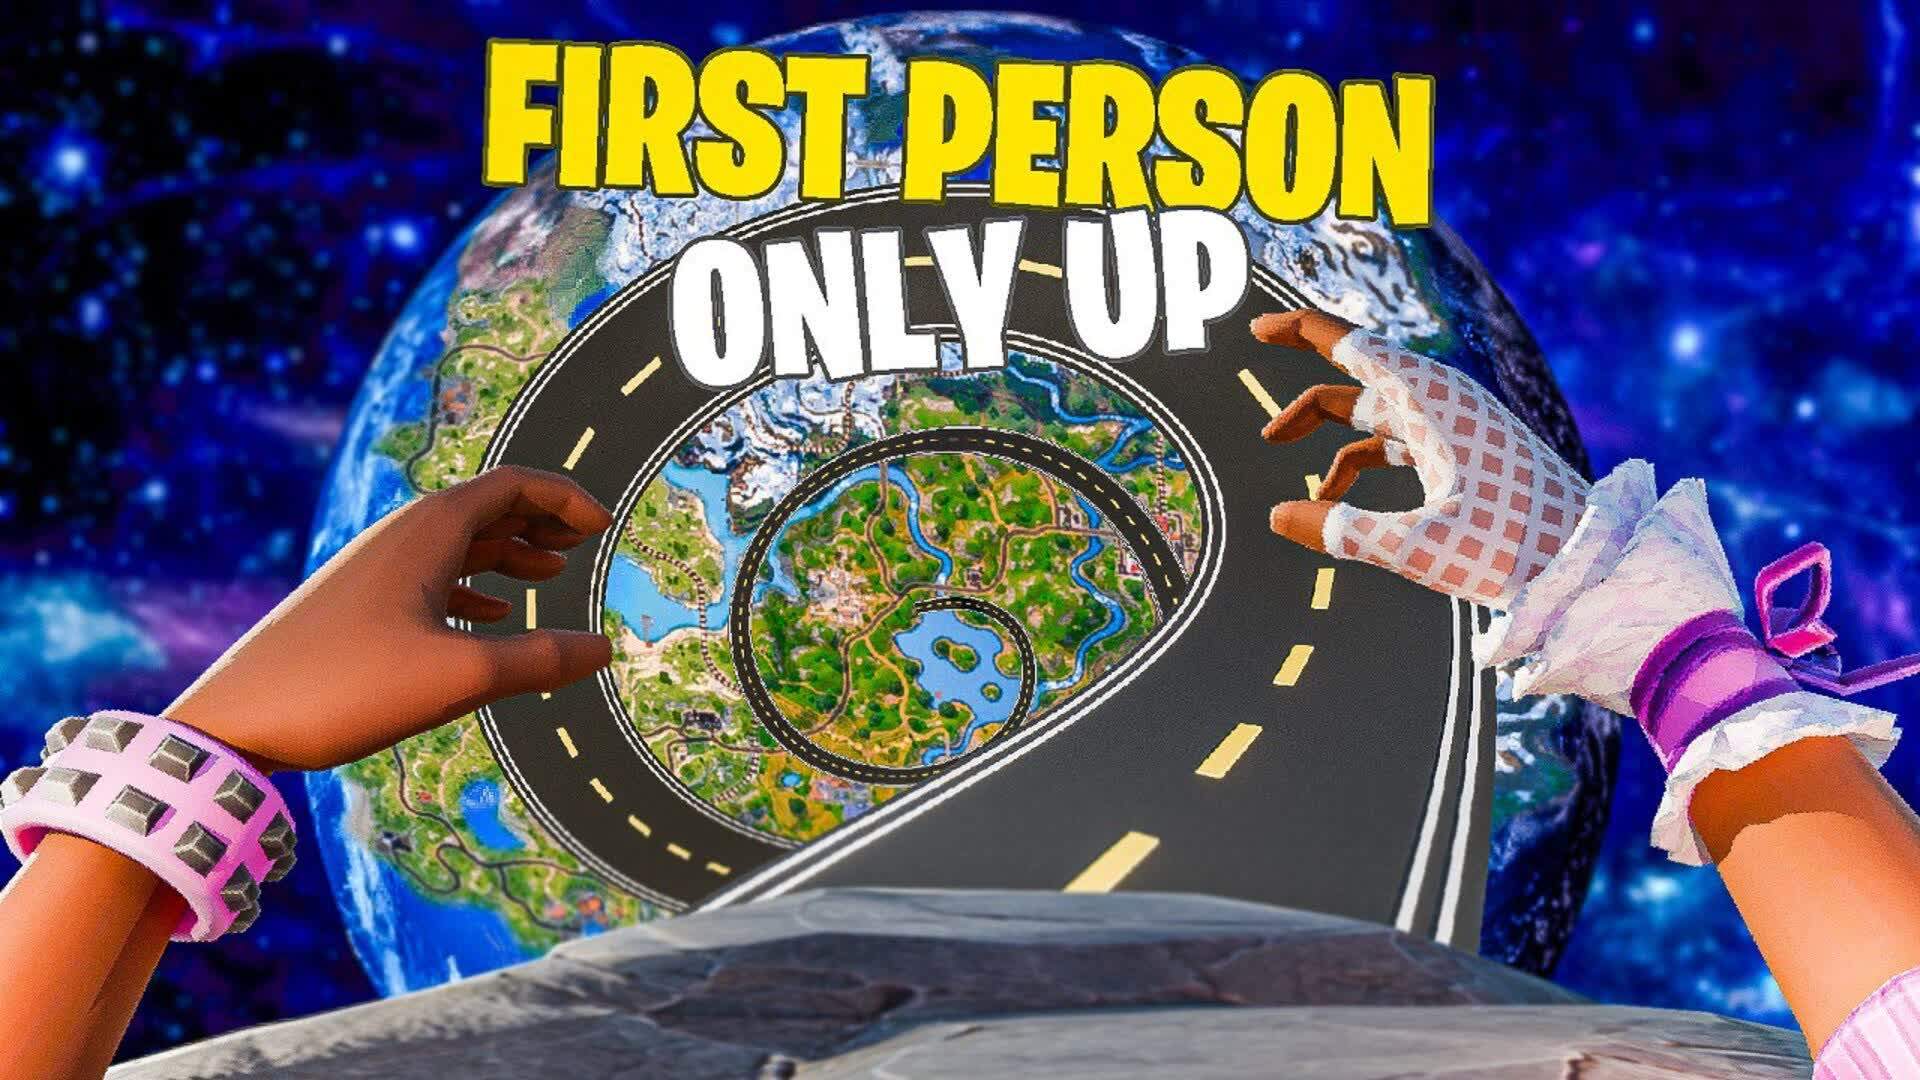 Only Up First Person